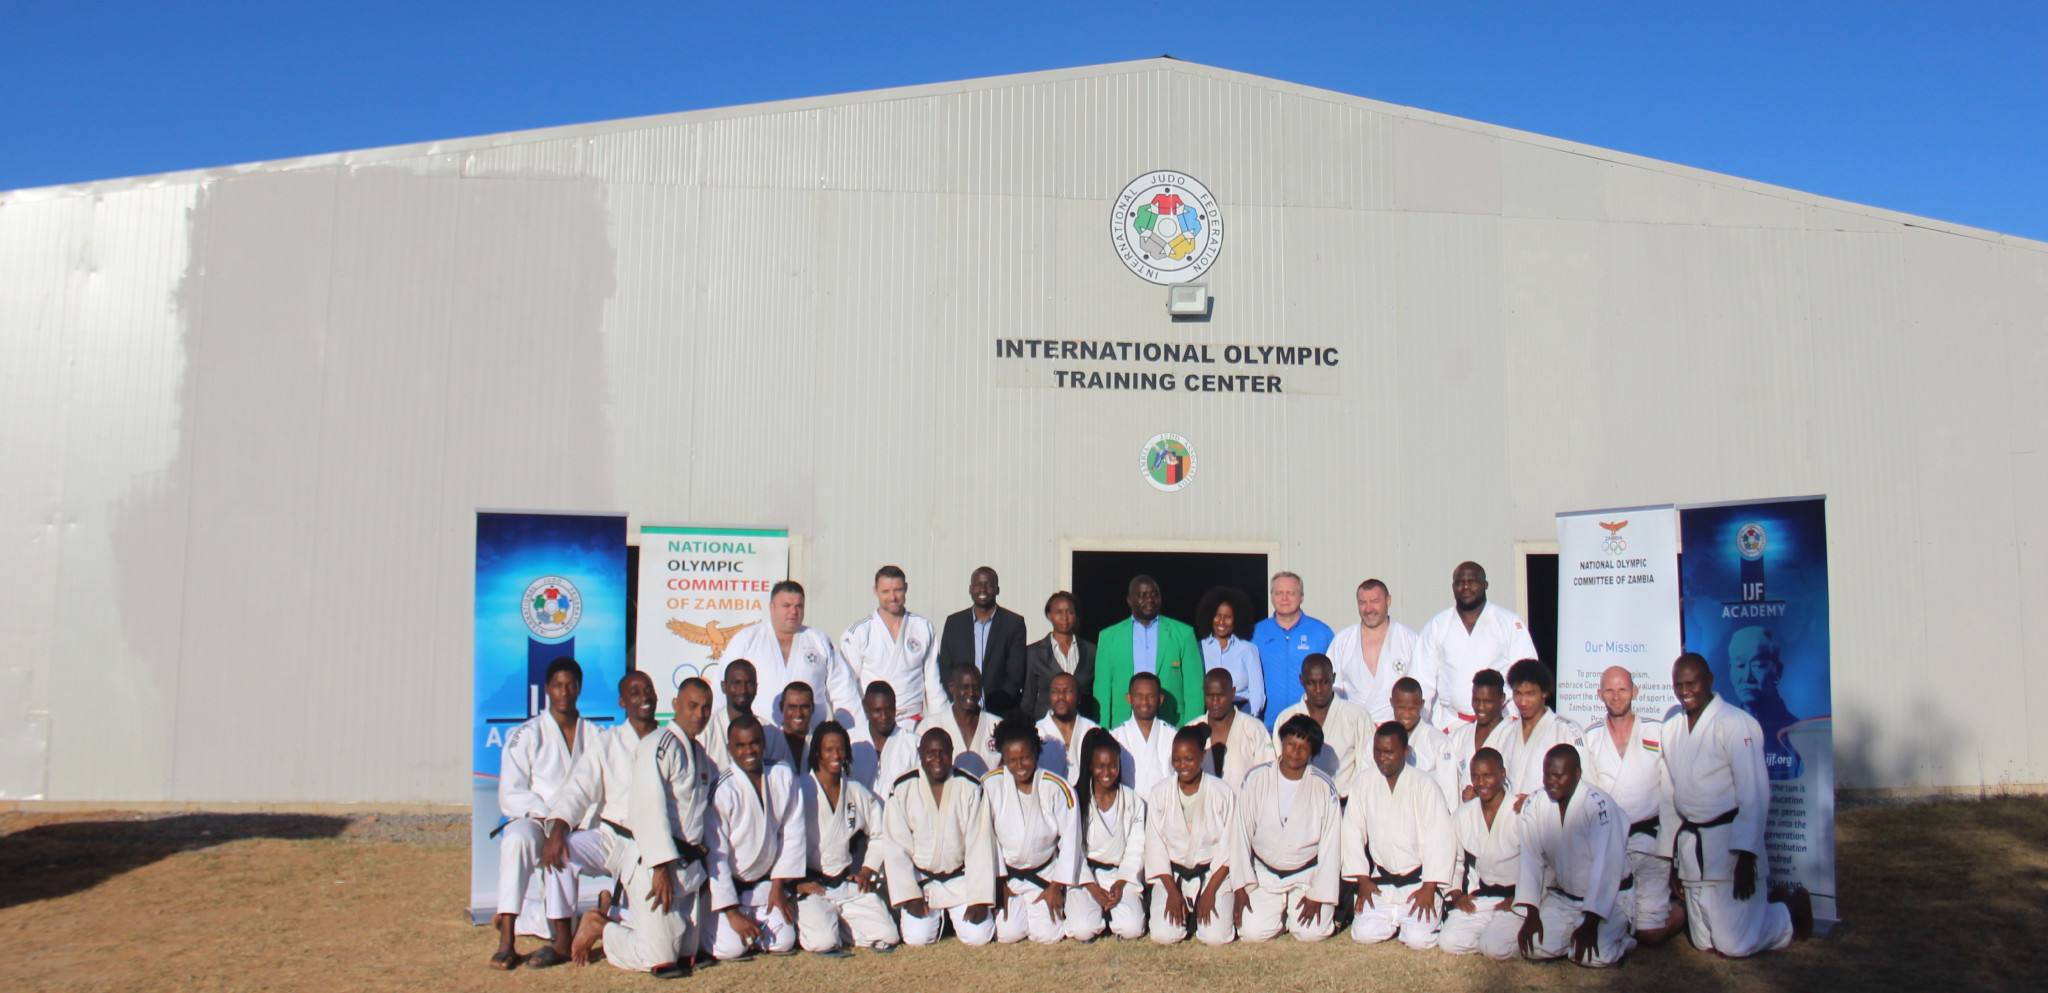 Coaches and experts line up at the Olympic Youth Development Centre in Lusaka during the IJF Academy Level 1 practical training course held in conjunction with the National Olympic Committee of Zambia ©NOCZ